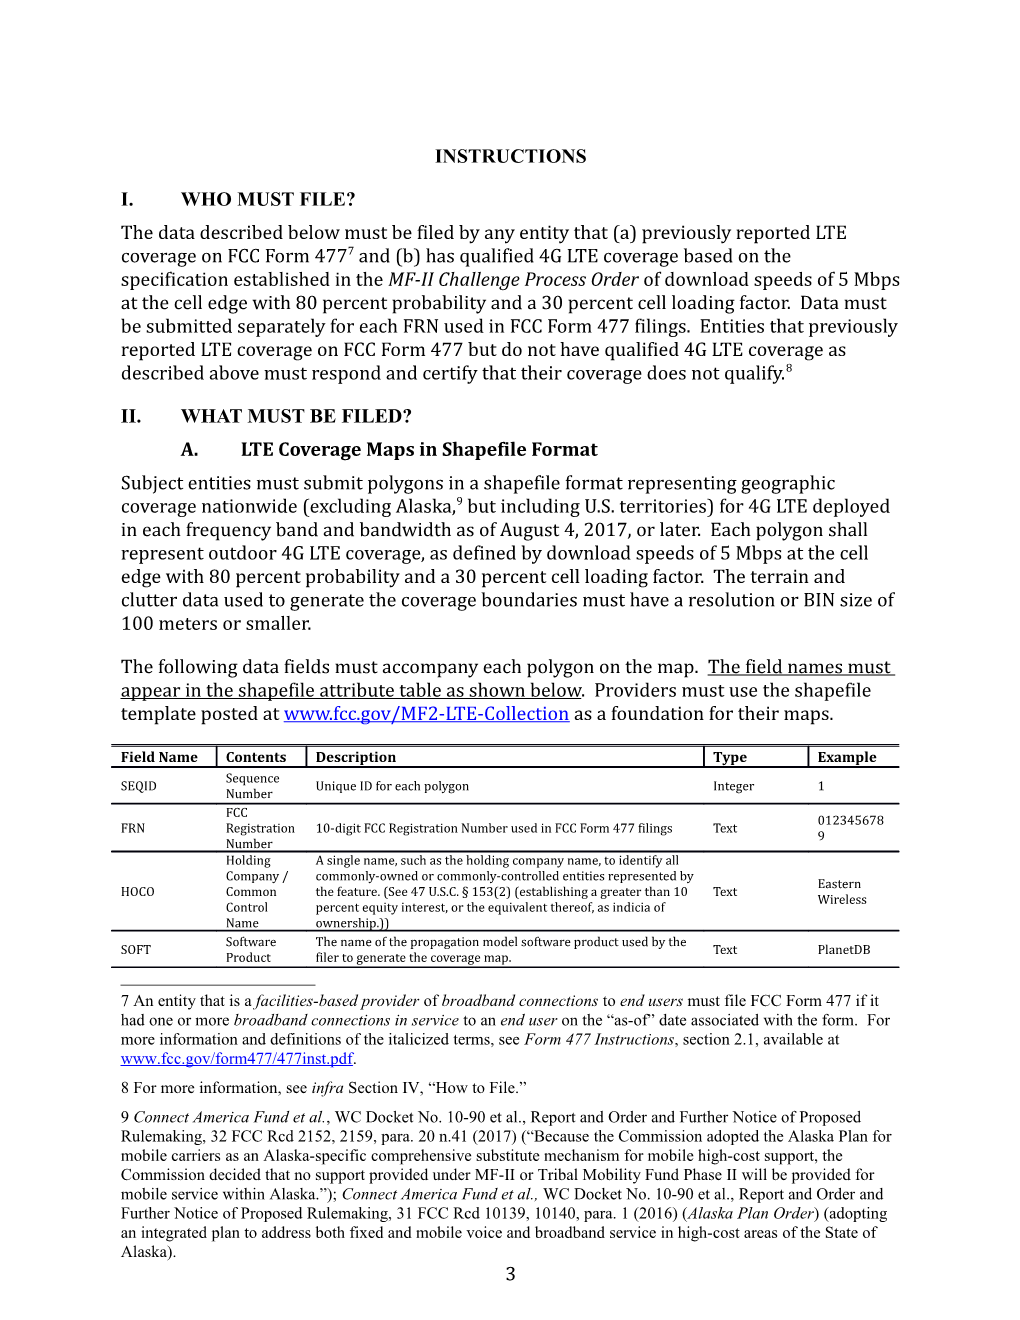 Instructions for Filing 4G LTE Coverage DATA to DETERMINE AREAS PRESUMPTIVELY ELIGIBLE